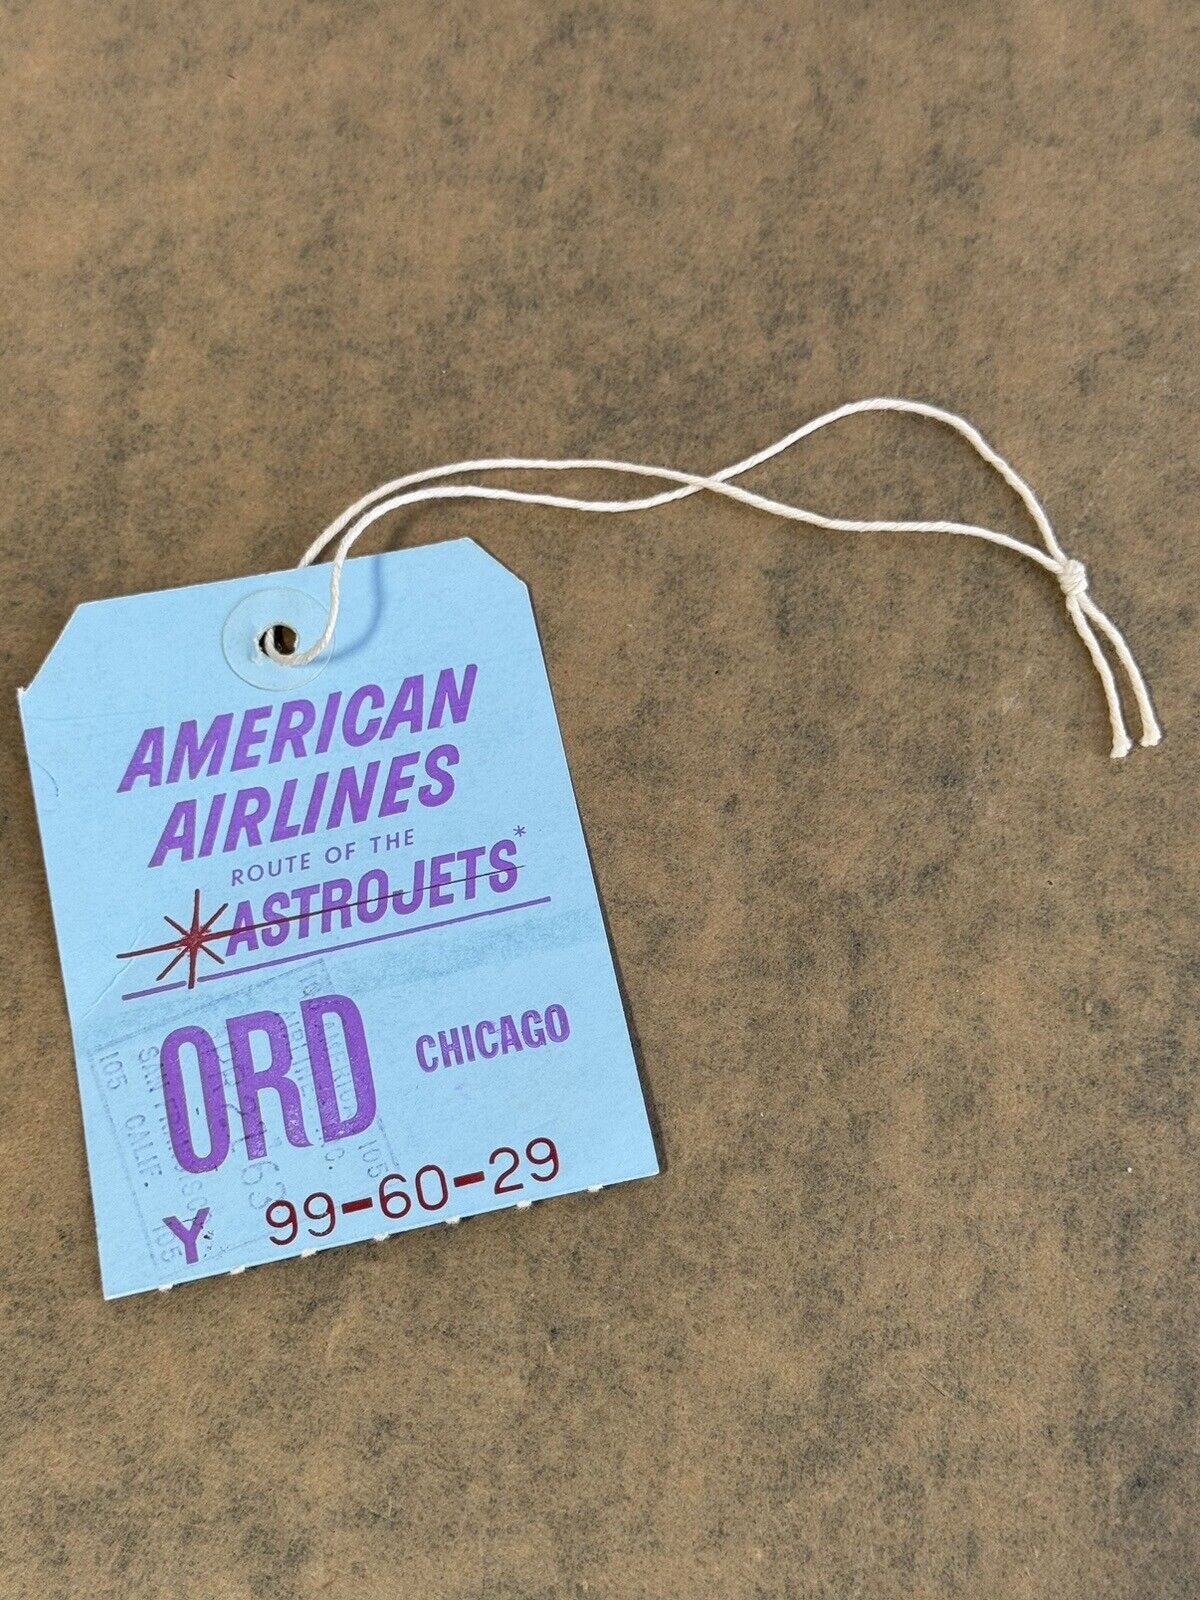 O’Hare Airport American Airlines Astrojets Luggage Tag Chicago Vintage 60’s 